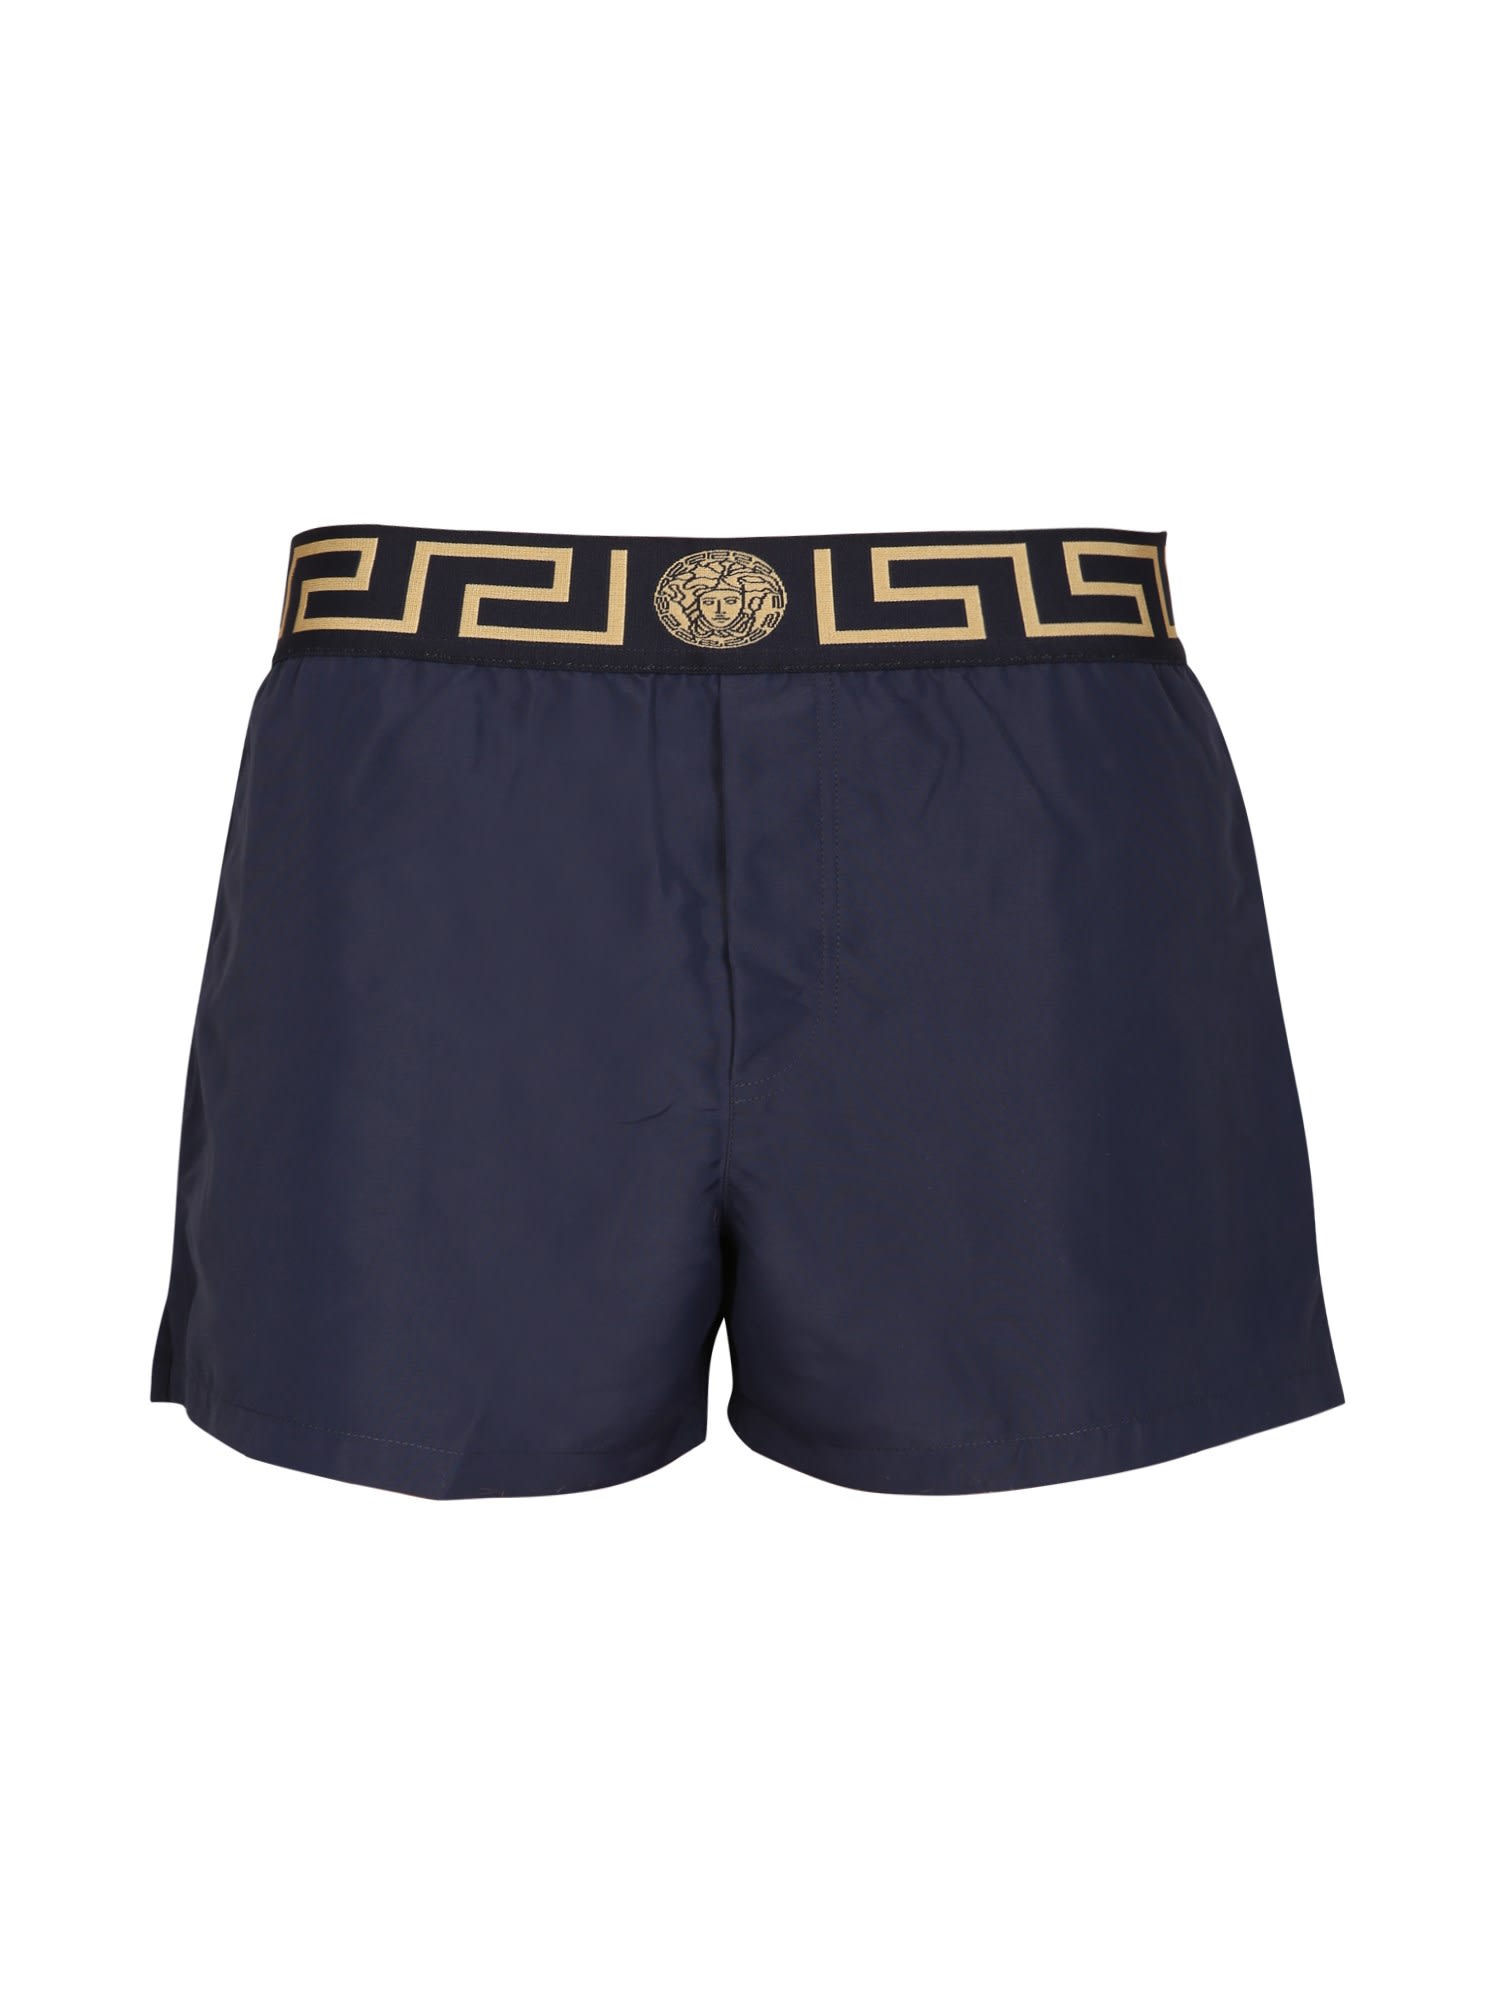 Versace Short Swimsuit With Greek